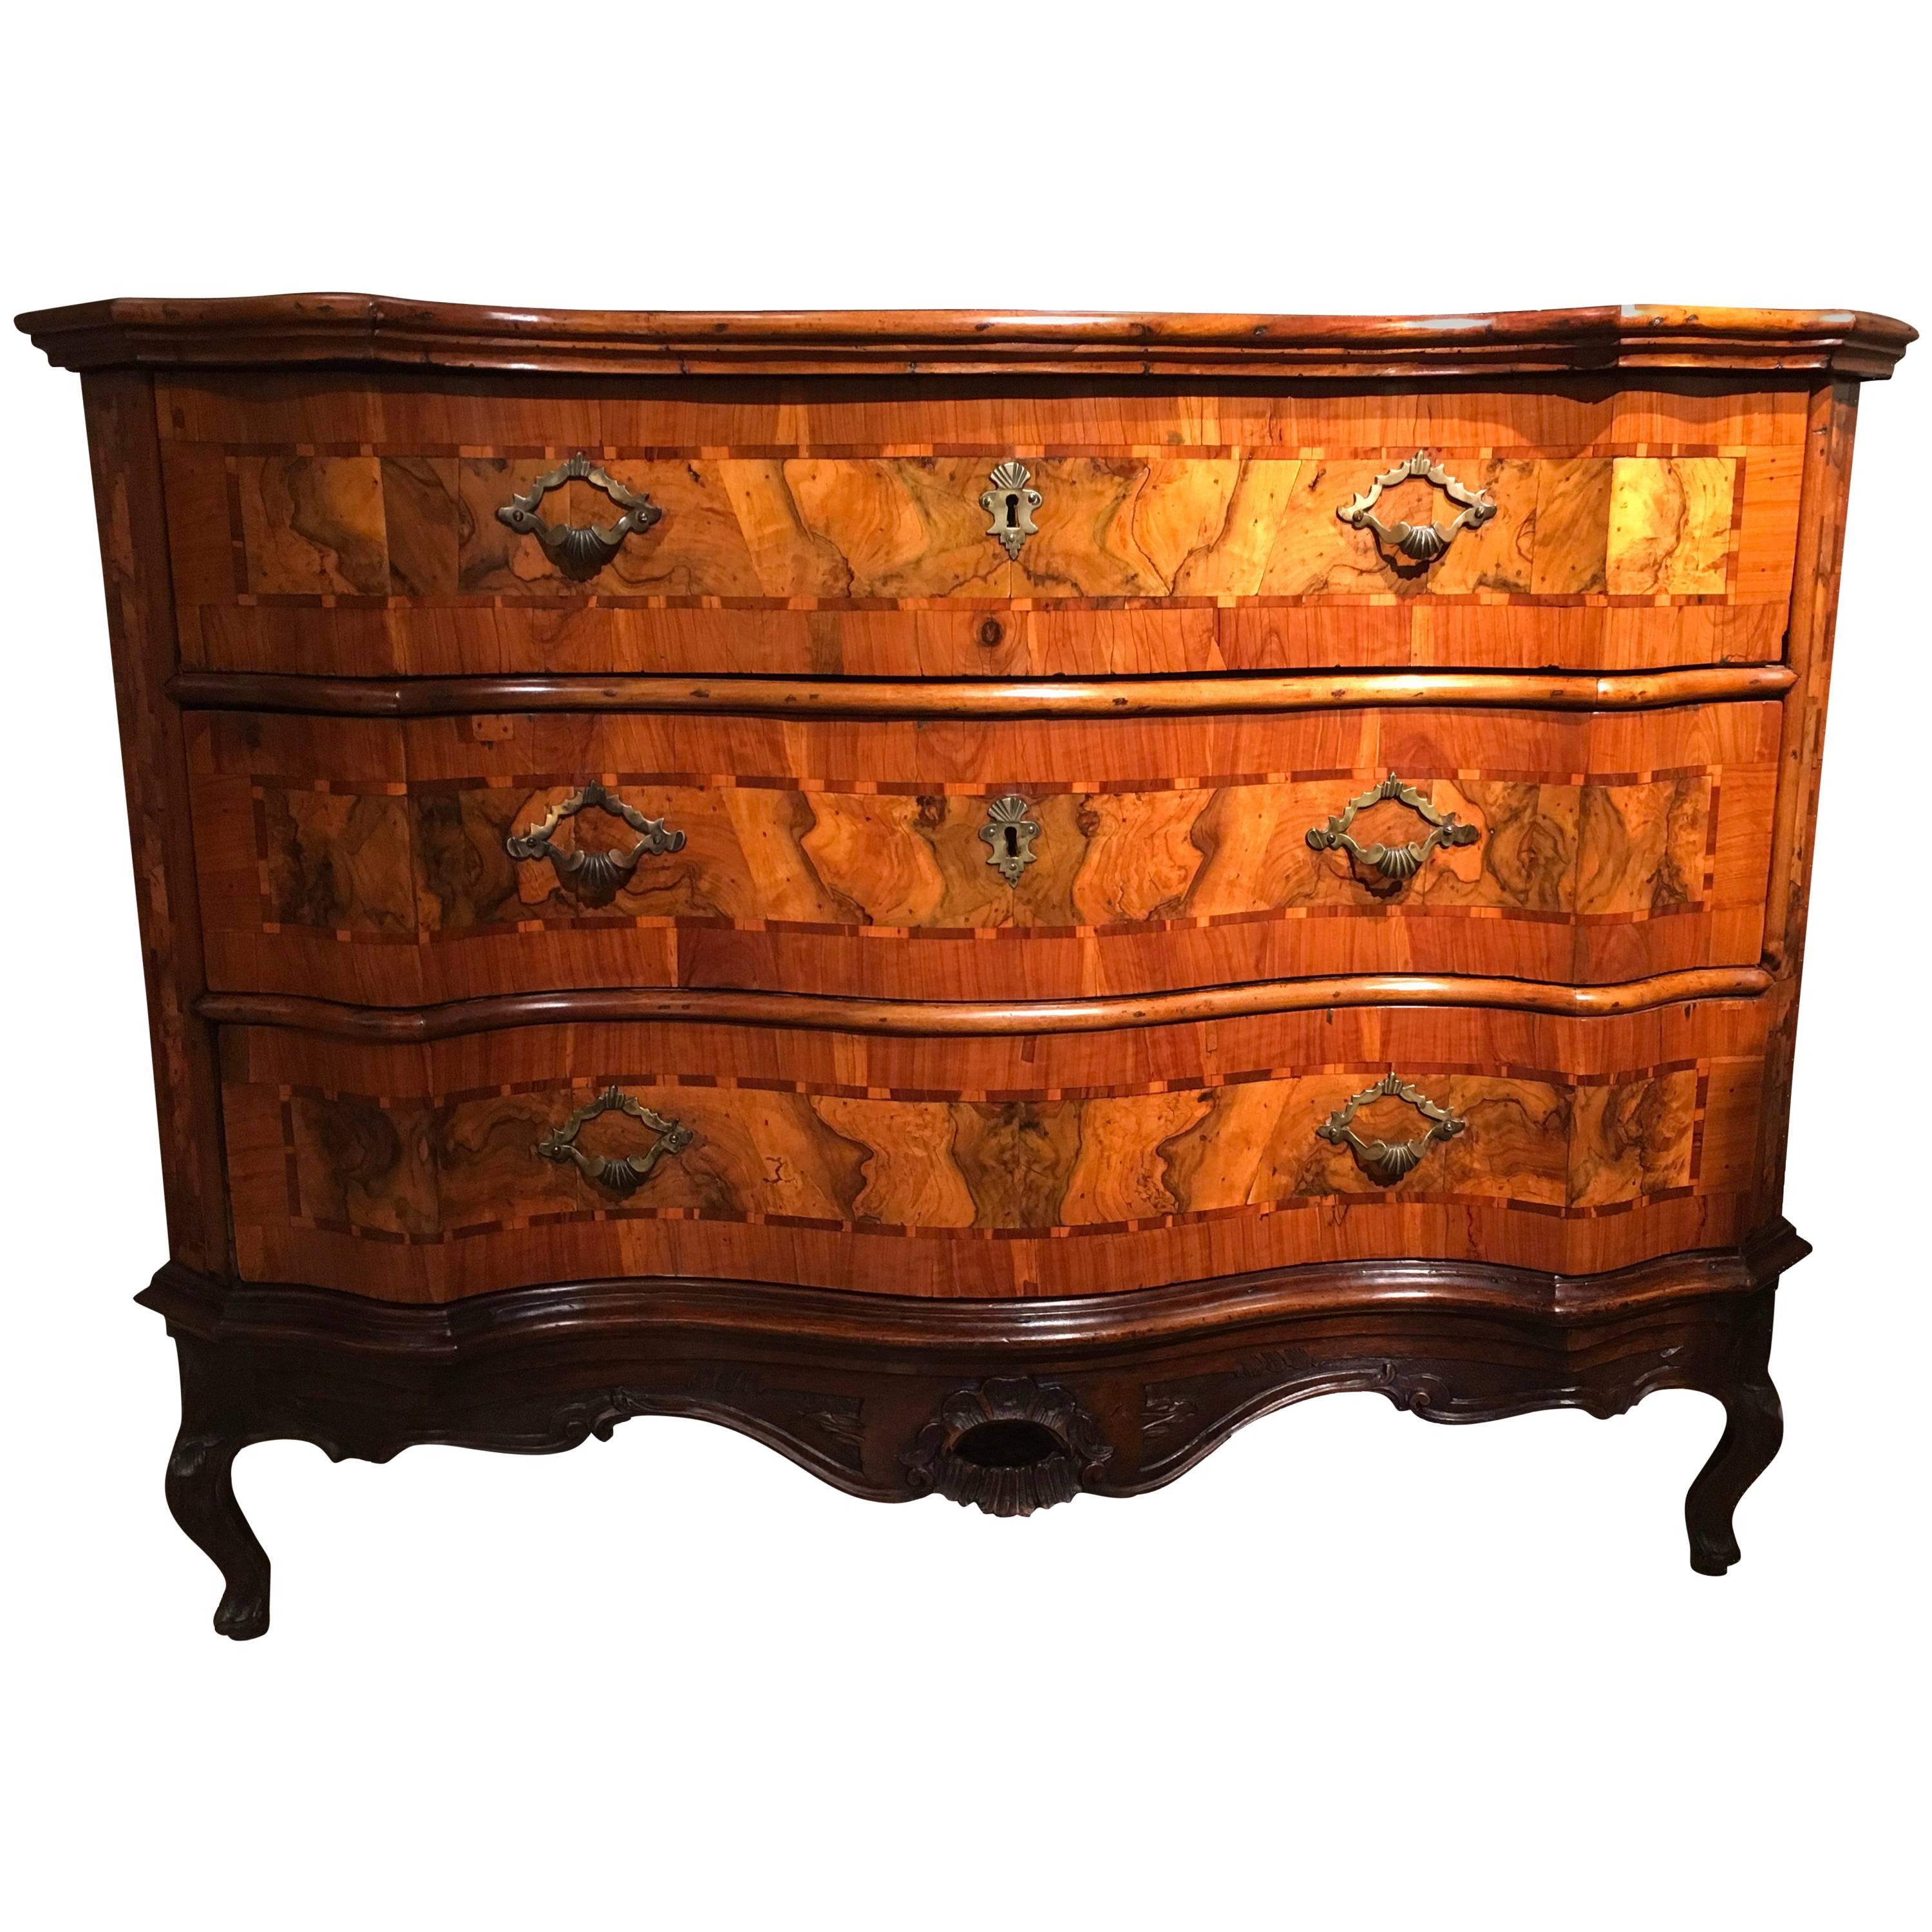 Italy Venezia 18th Century Baroque Olive and Briar Wood Chest of Drawers For Sale